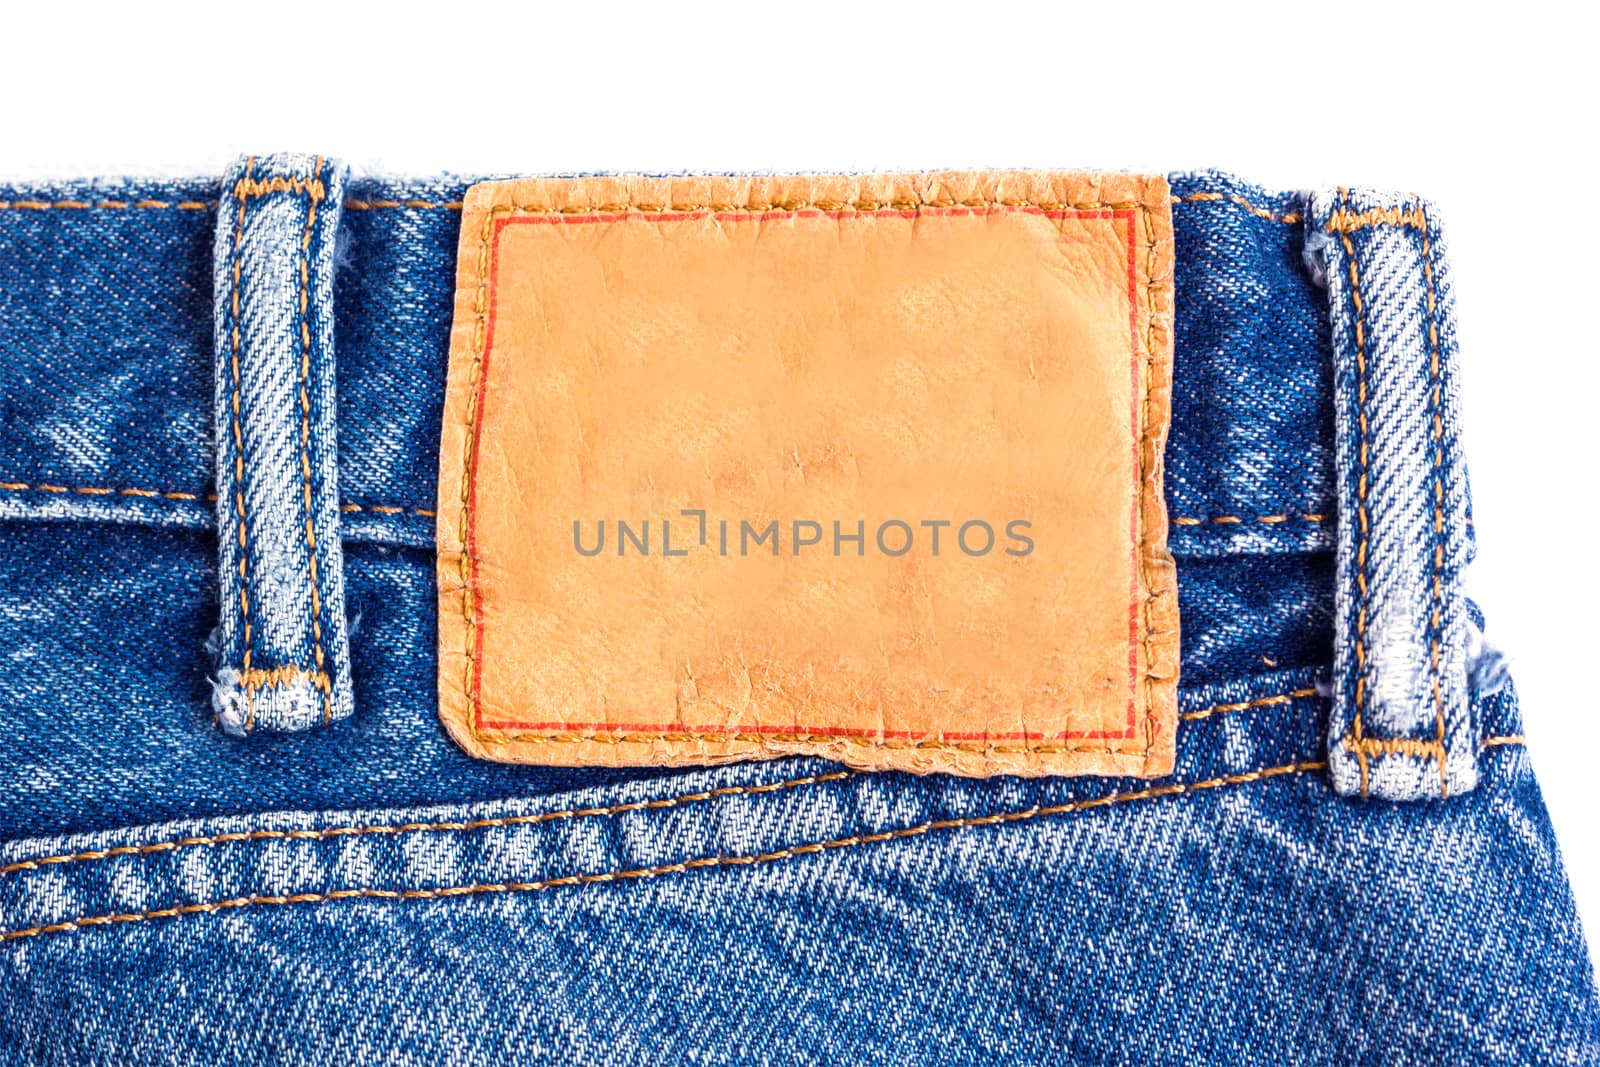 denim jeans background with blank leather label of jeans fashion design